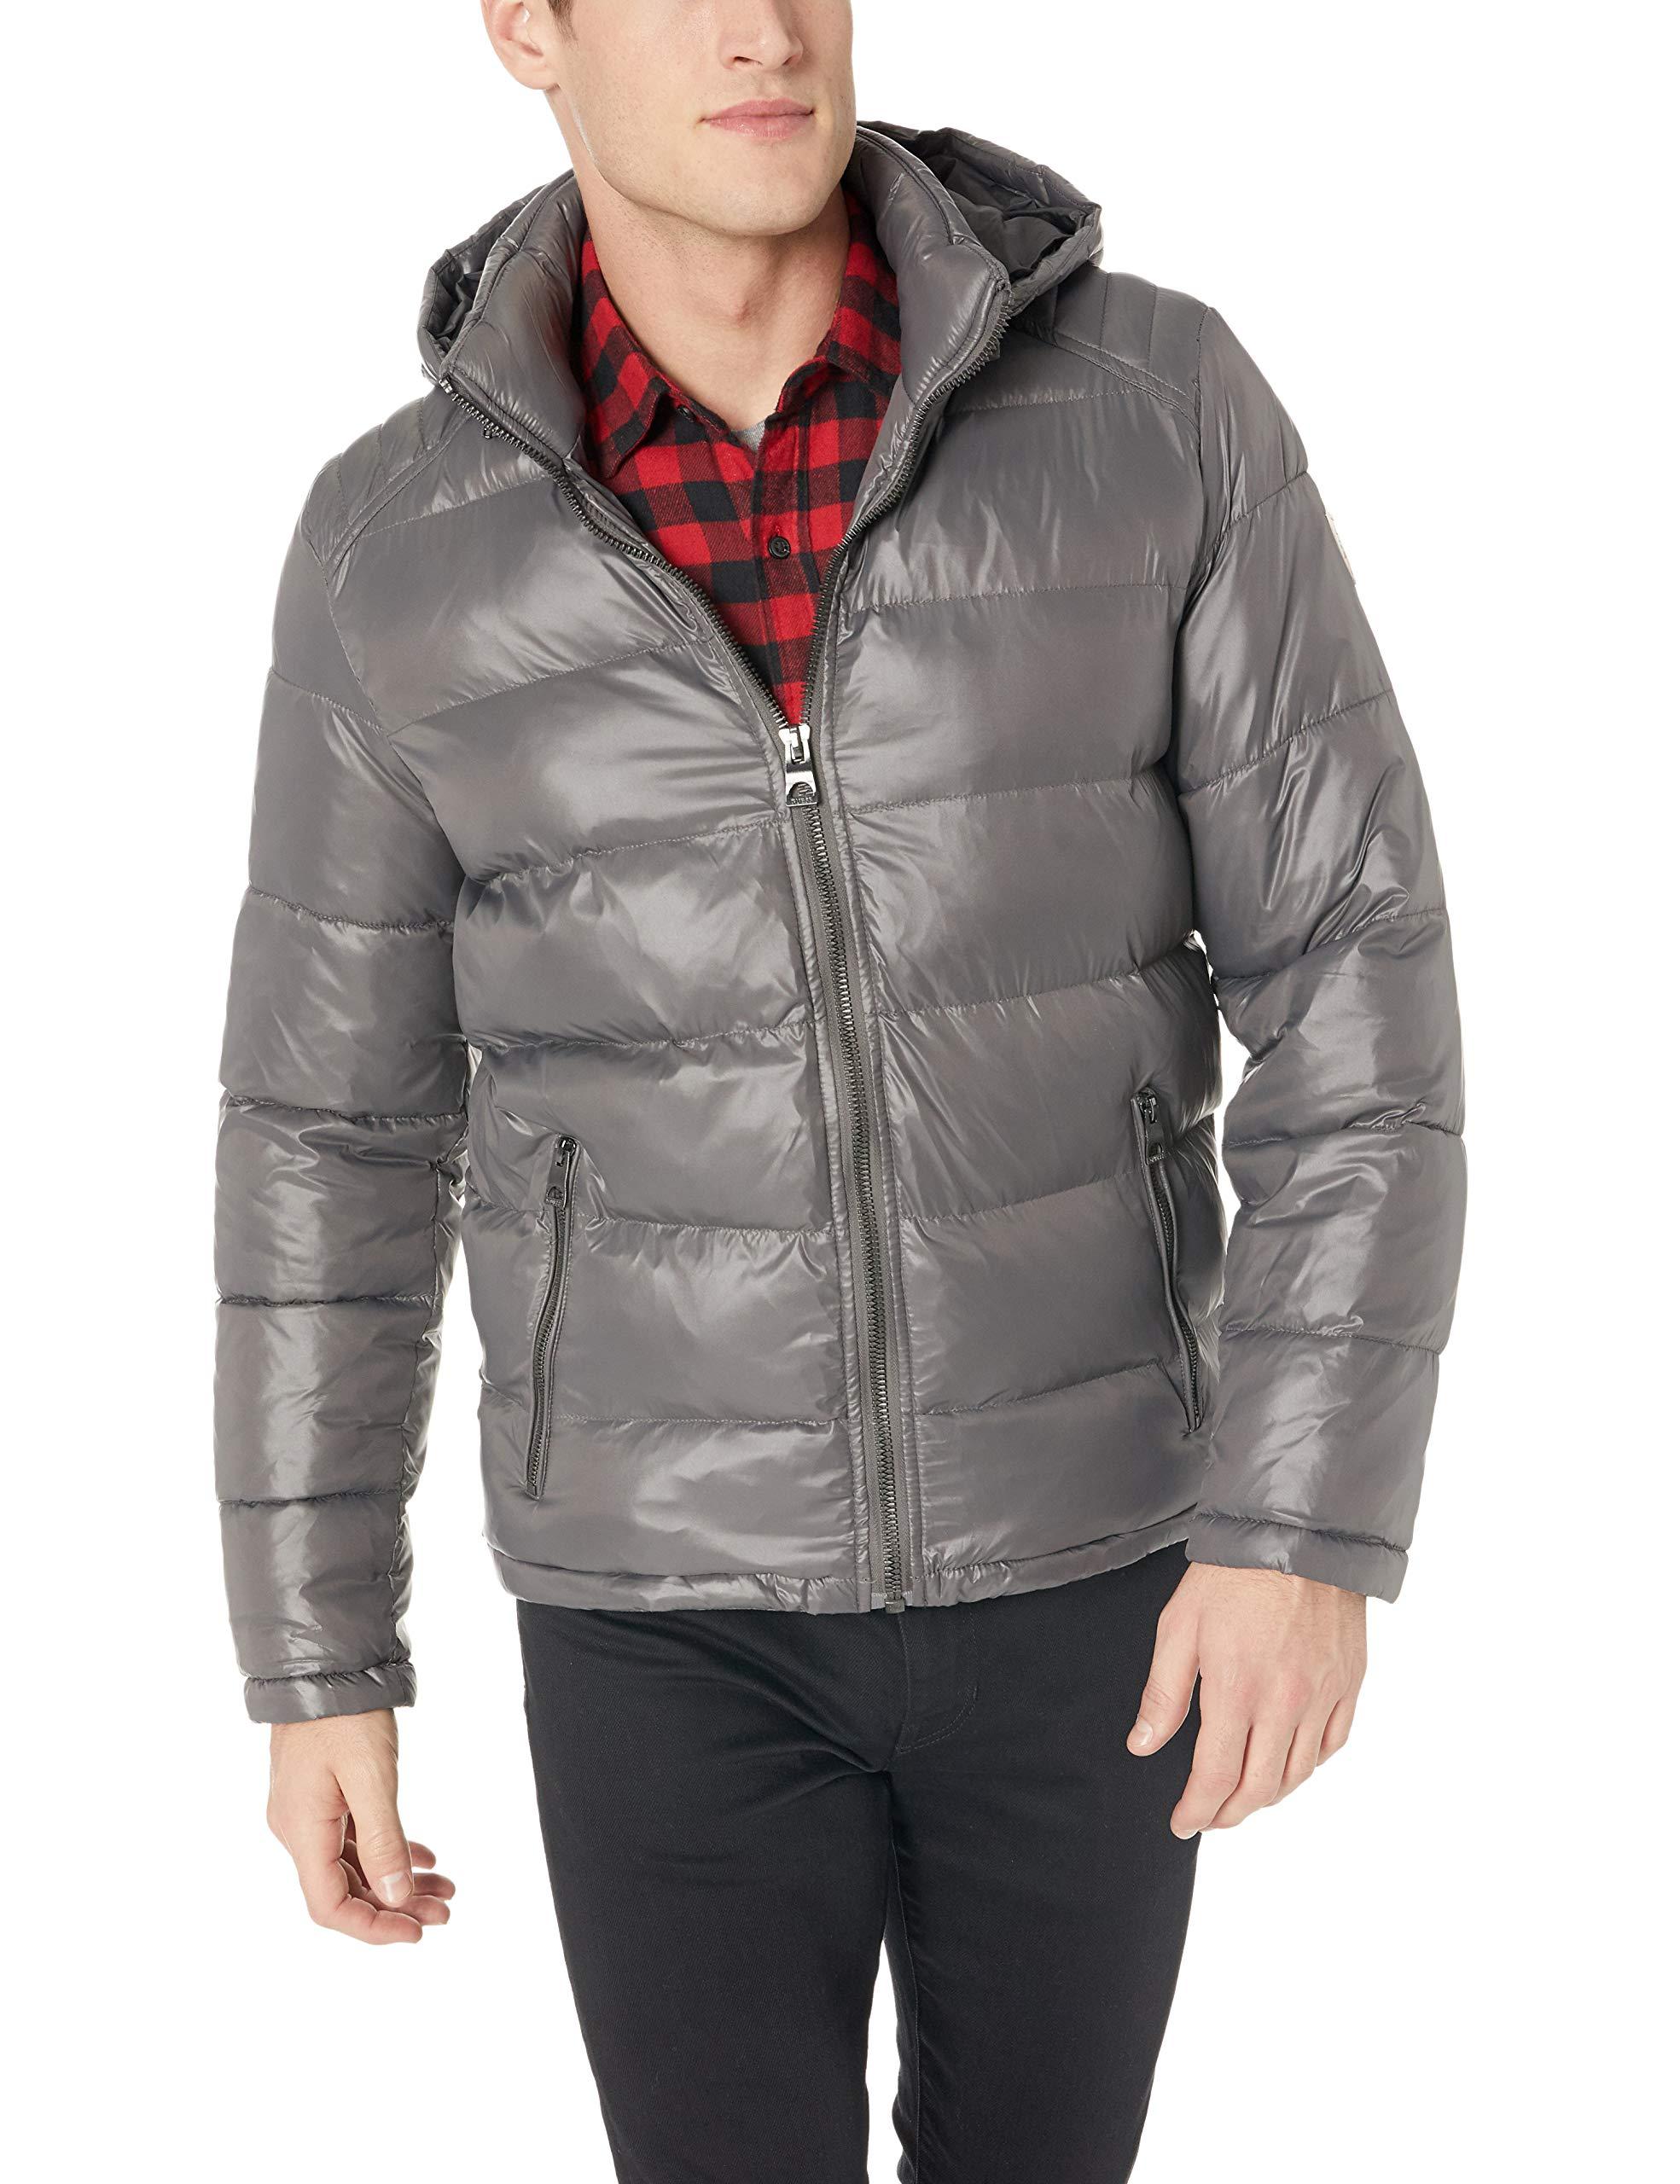 Guess Puffer Jacket in Smoke (Gray) for Men - Save 62% - Lyst